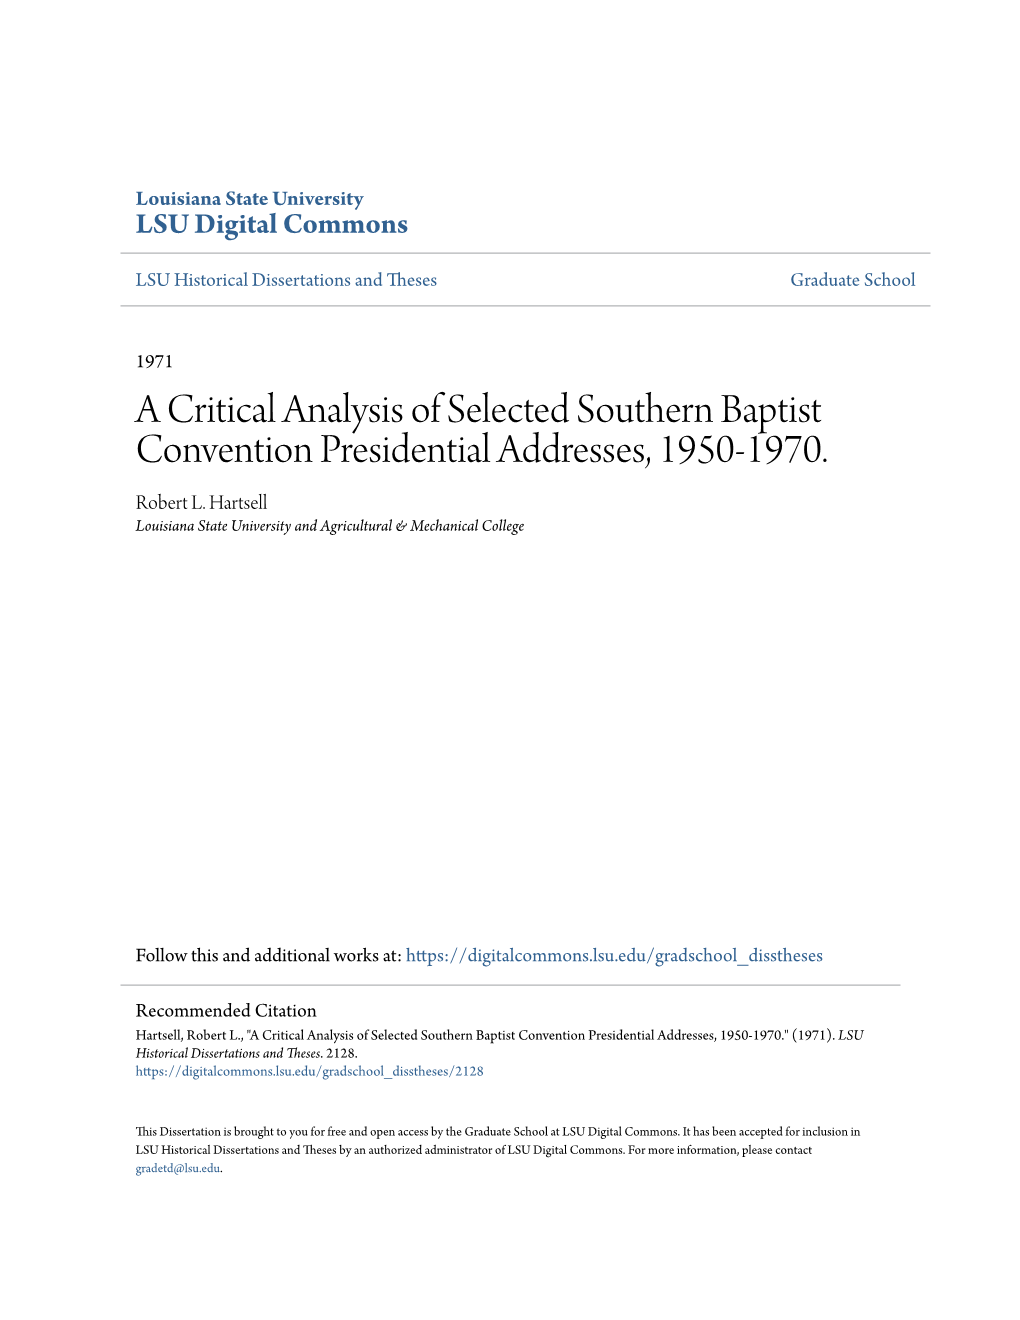 A Critical Analysis of Selected Southern Baptist Convention Presidential Addresses, 1950-1970